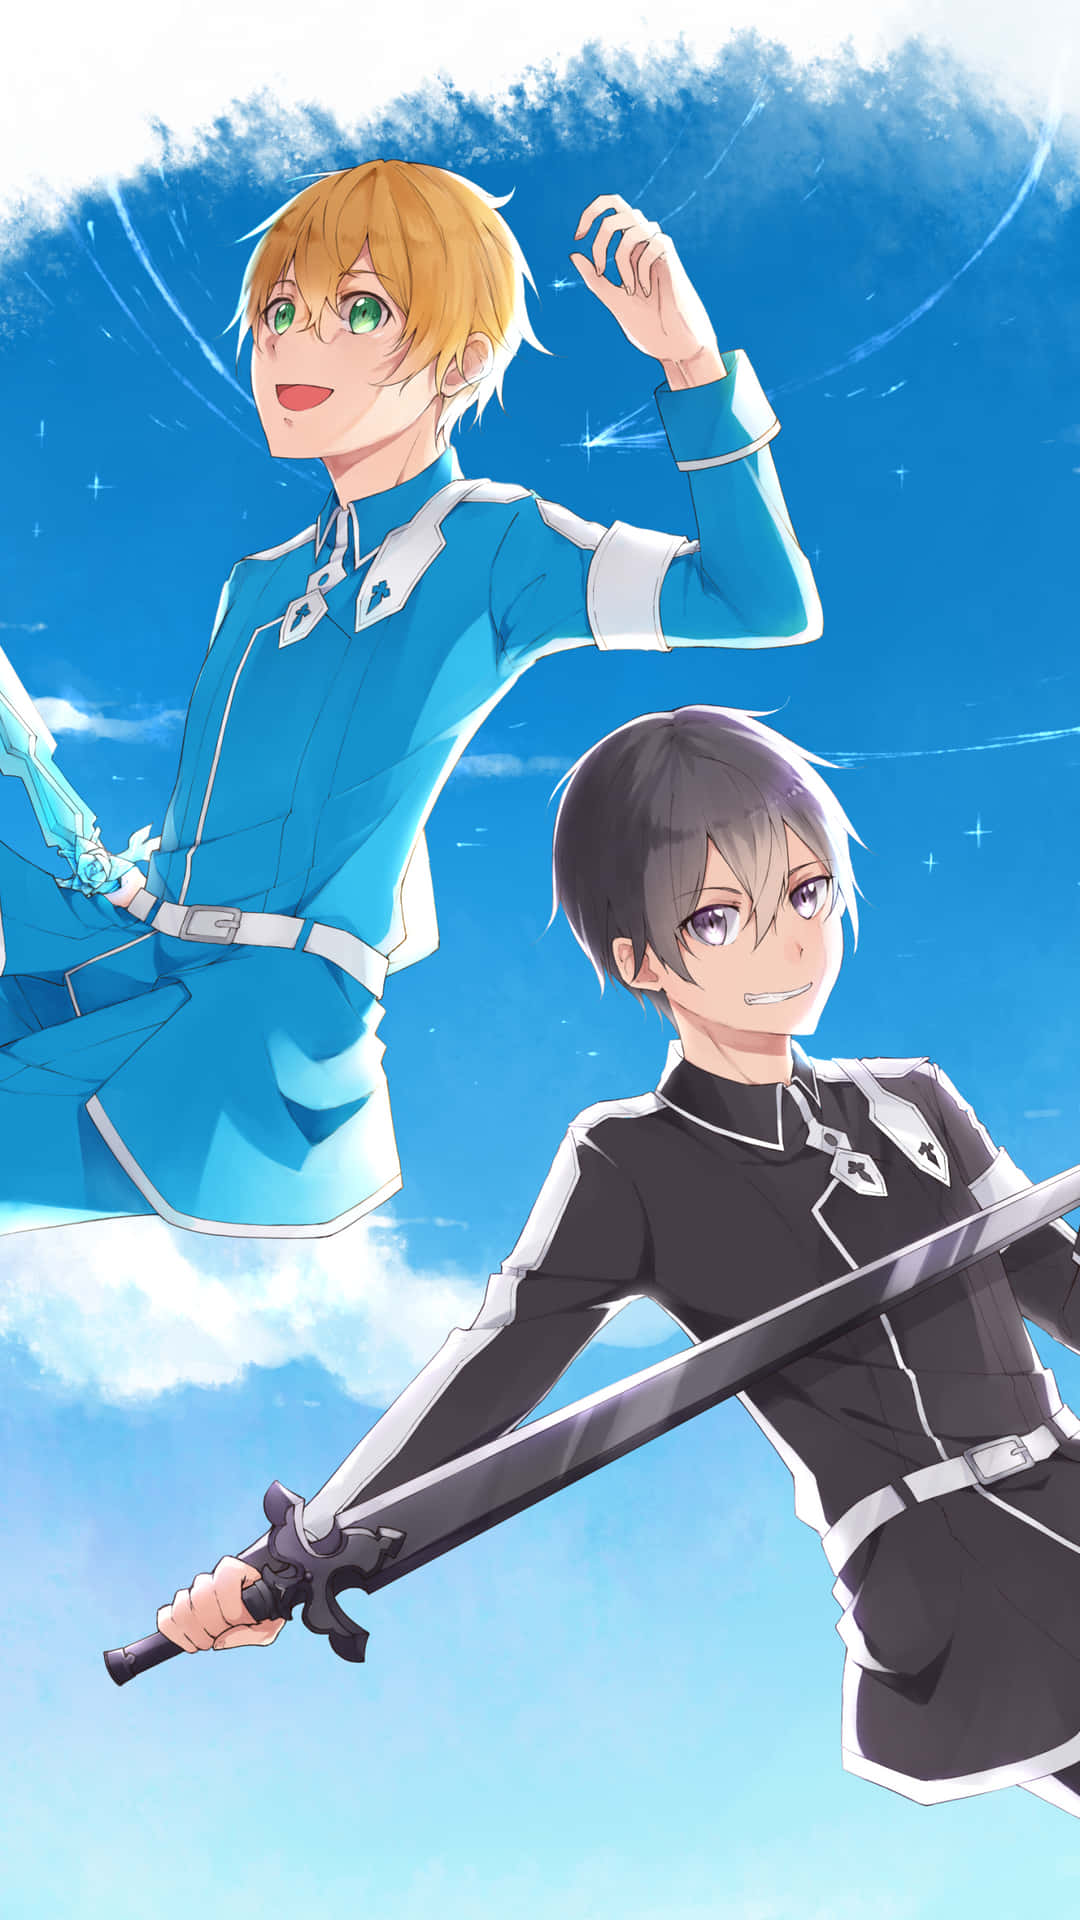 Two Anime Characters With Swords In The Sky Wallpaper